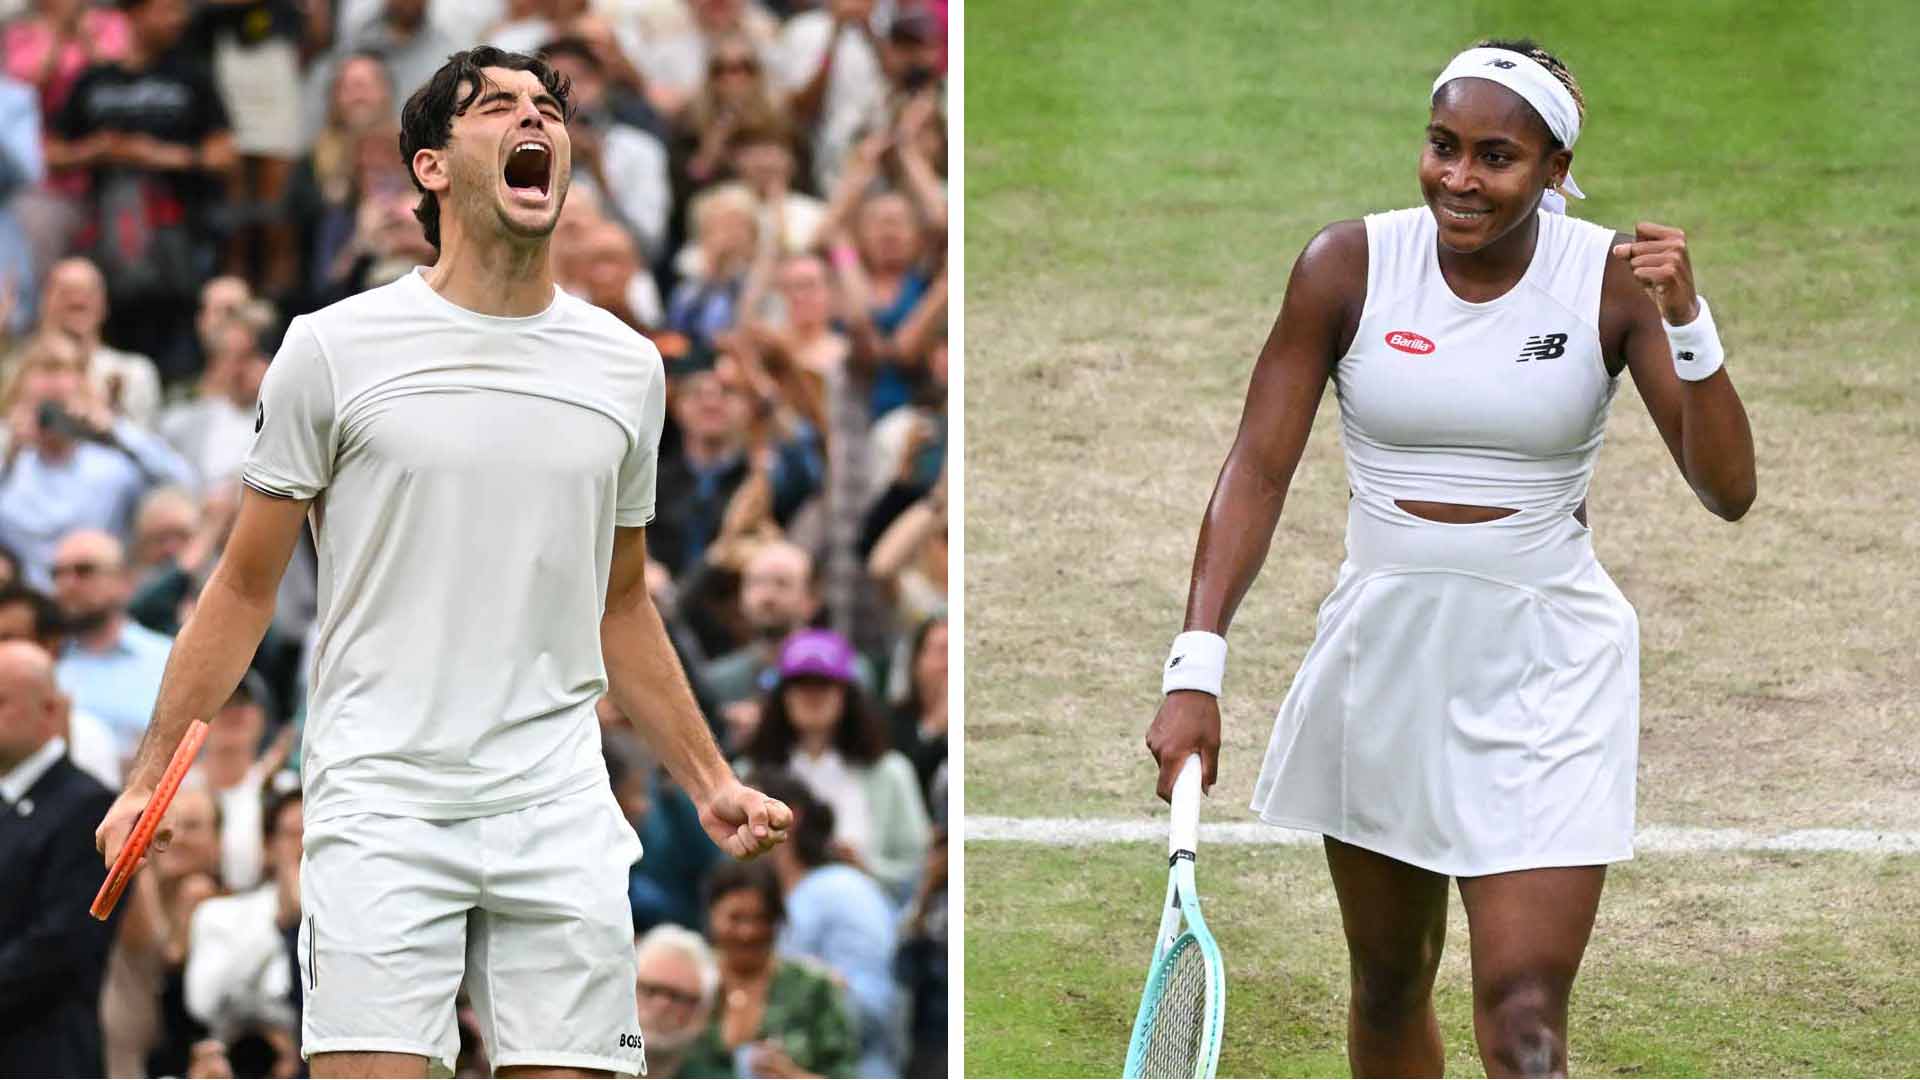 Taylor Fritz and Coco Gauff will represent the United States in mixed doubles.